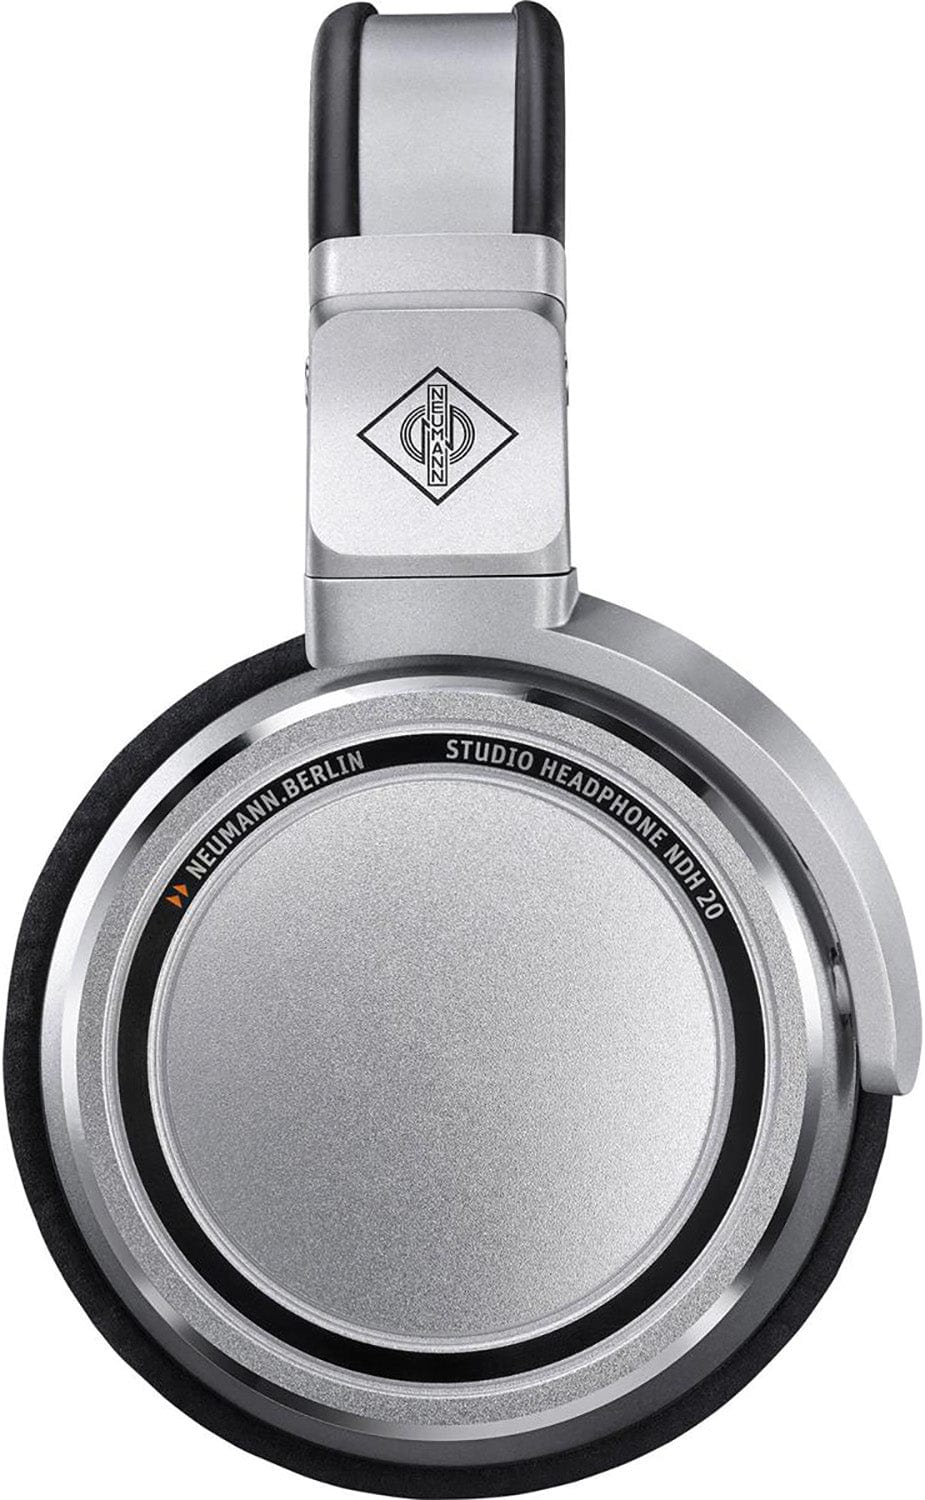 Neumann NDH-20 Closed-back Studio Headphones - Silver with Black and Orange Trim - PSSL ProSound and Stage Lighting